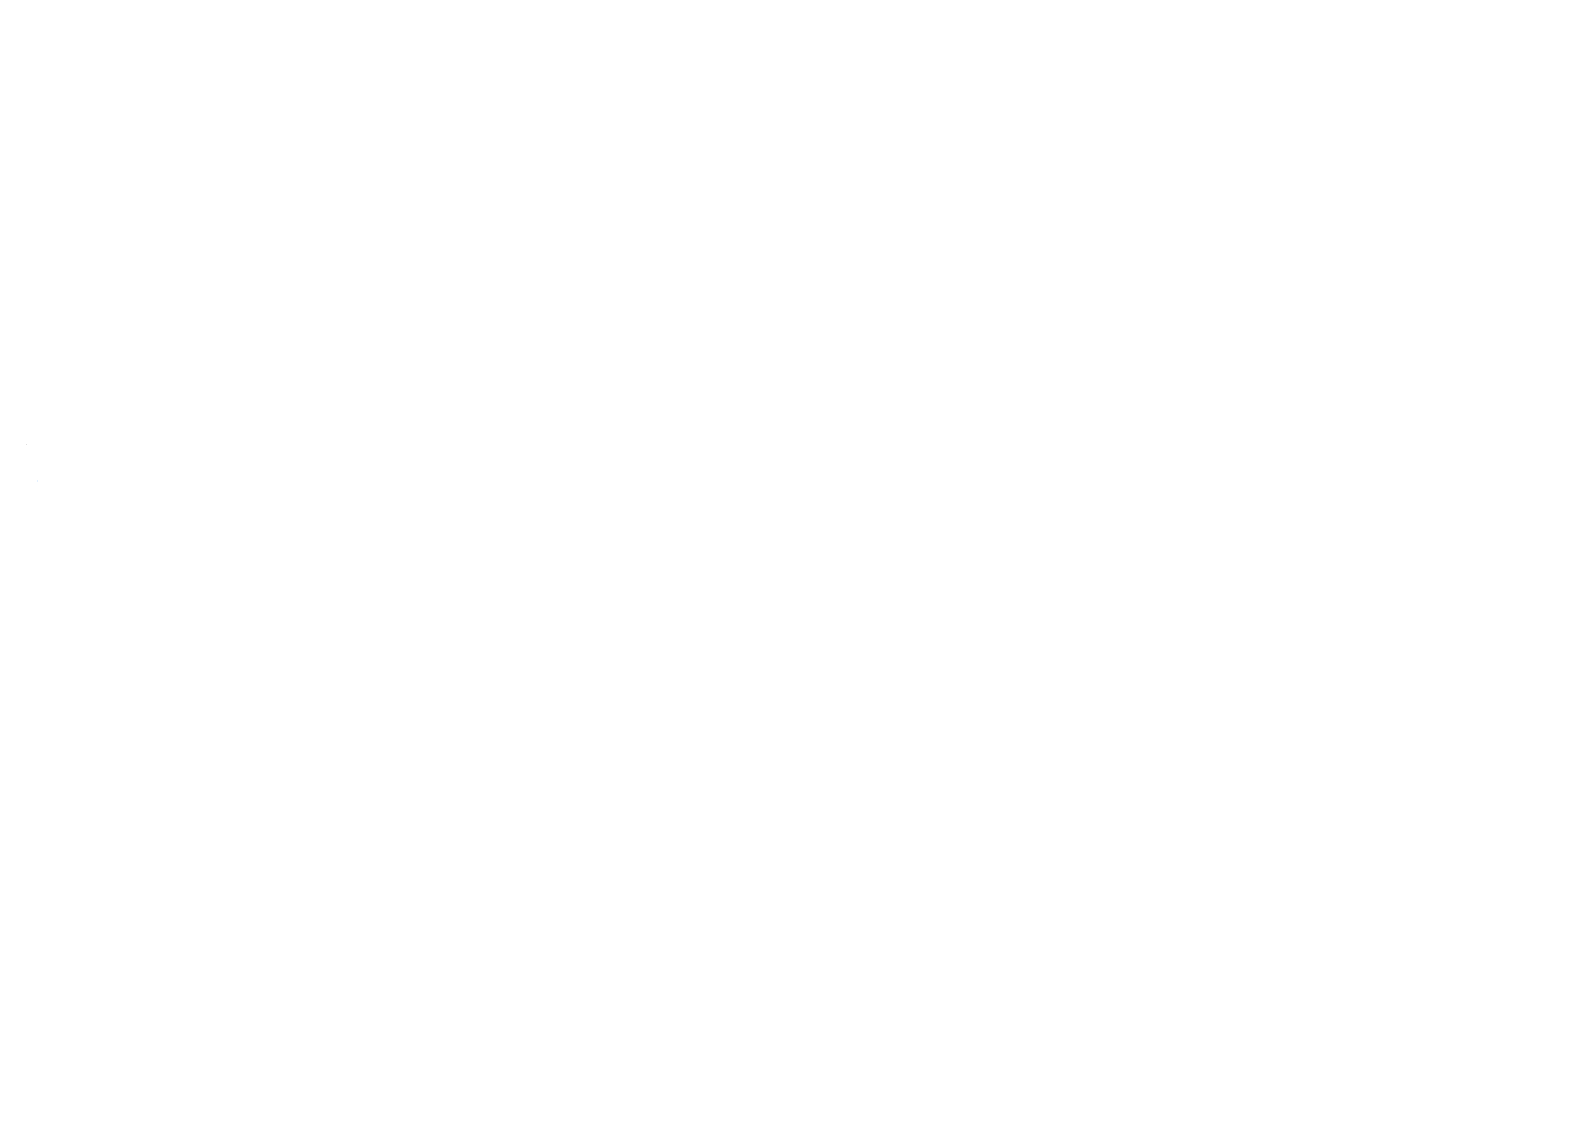 Dylan Miles Experience